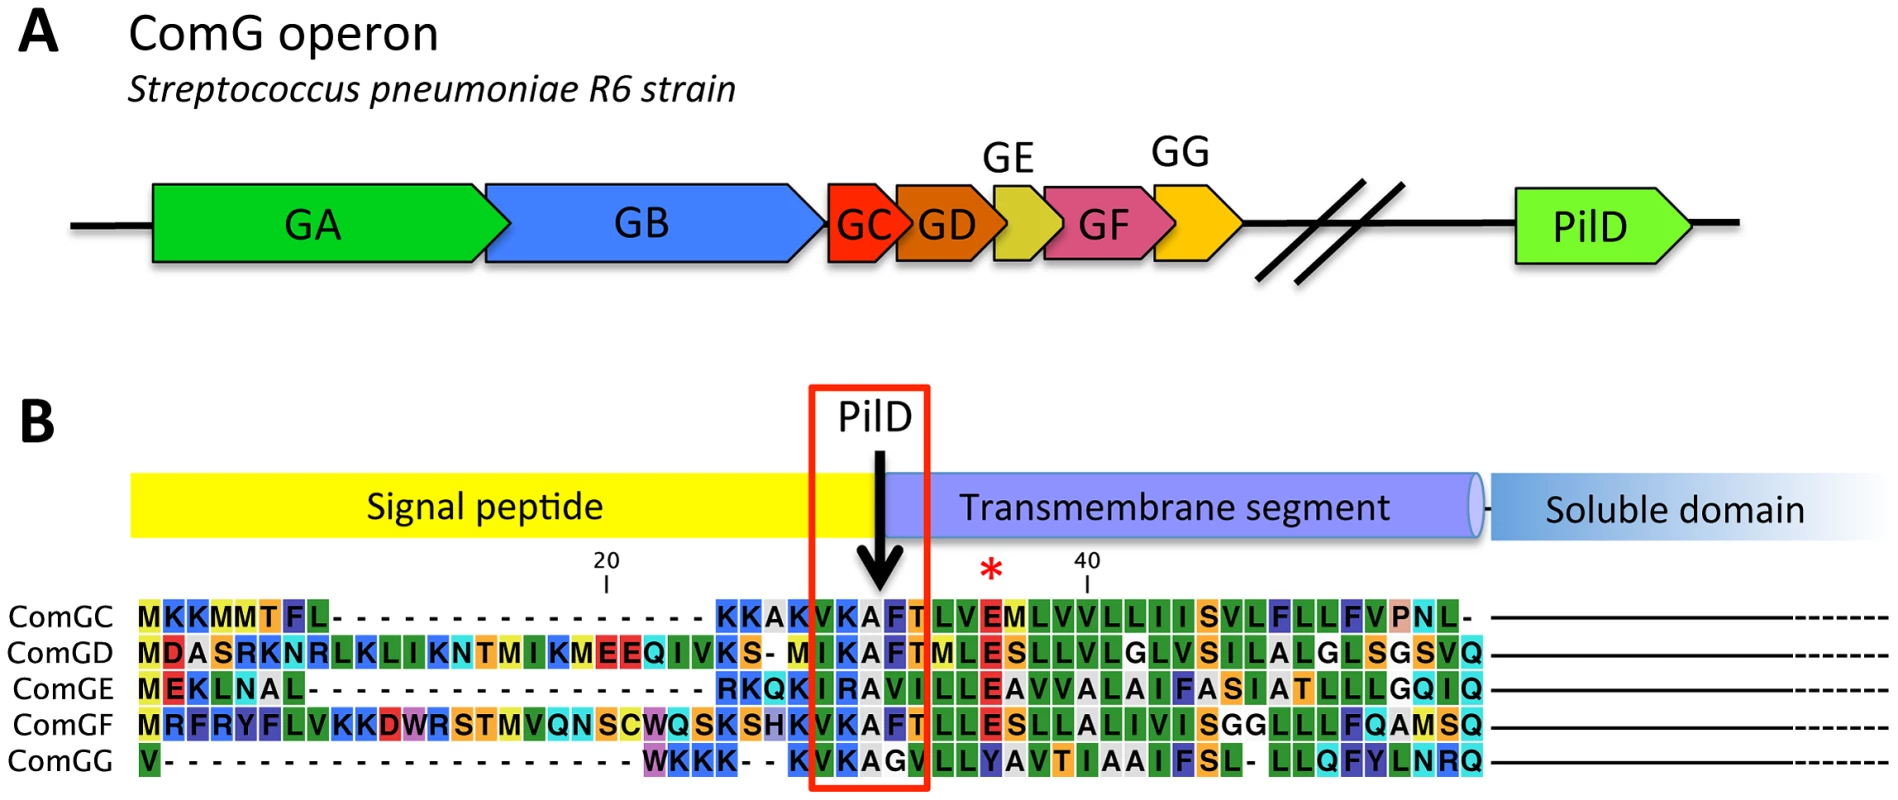 Genes potentially essential for transformation pilus assembly in <i>S. pneumonia and</i> prepilin sequences.